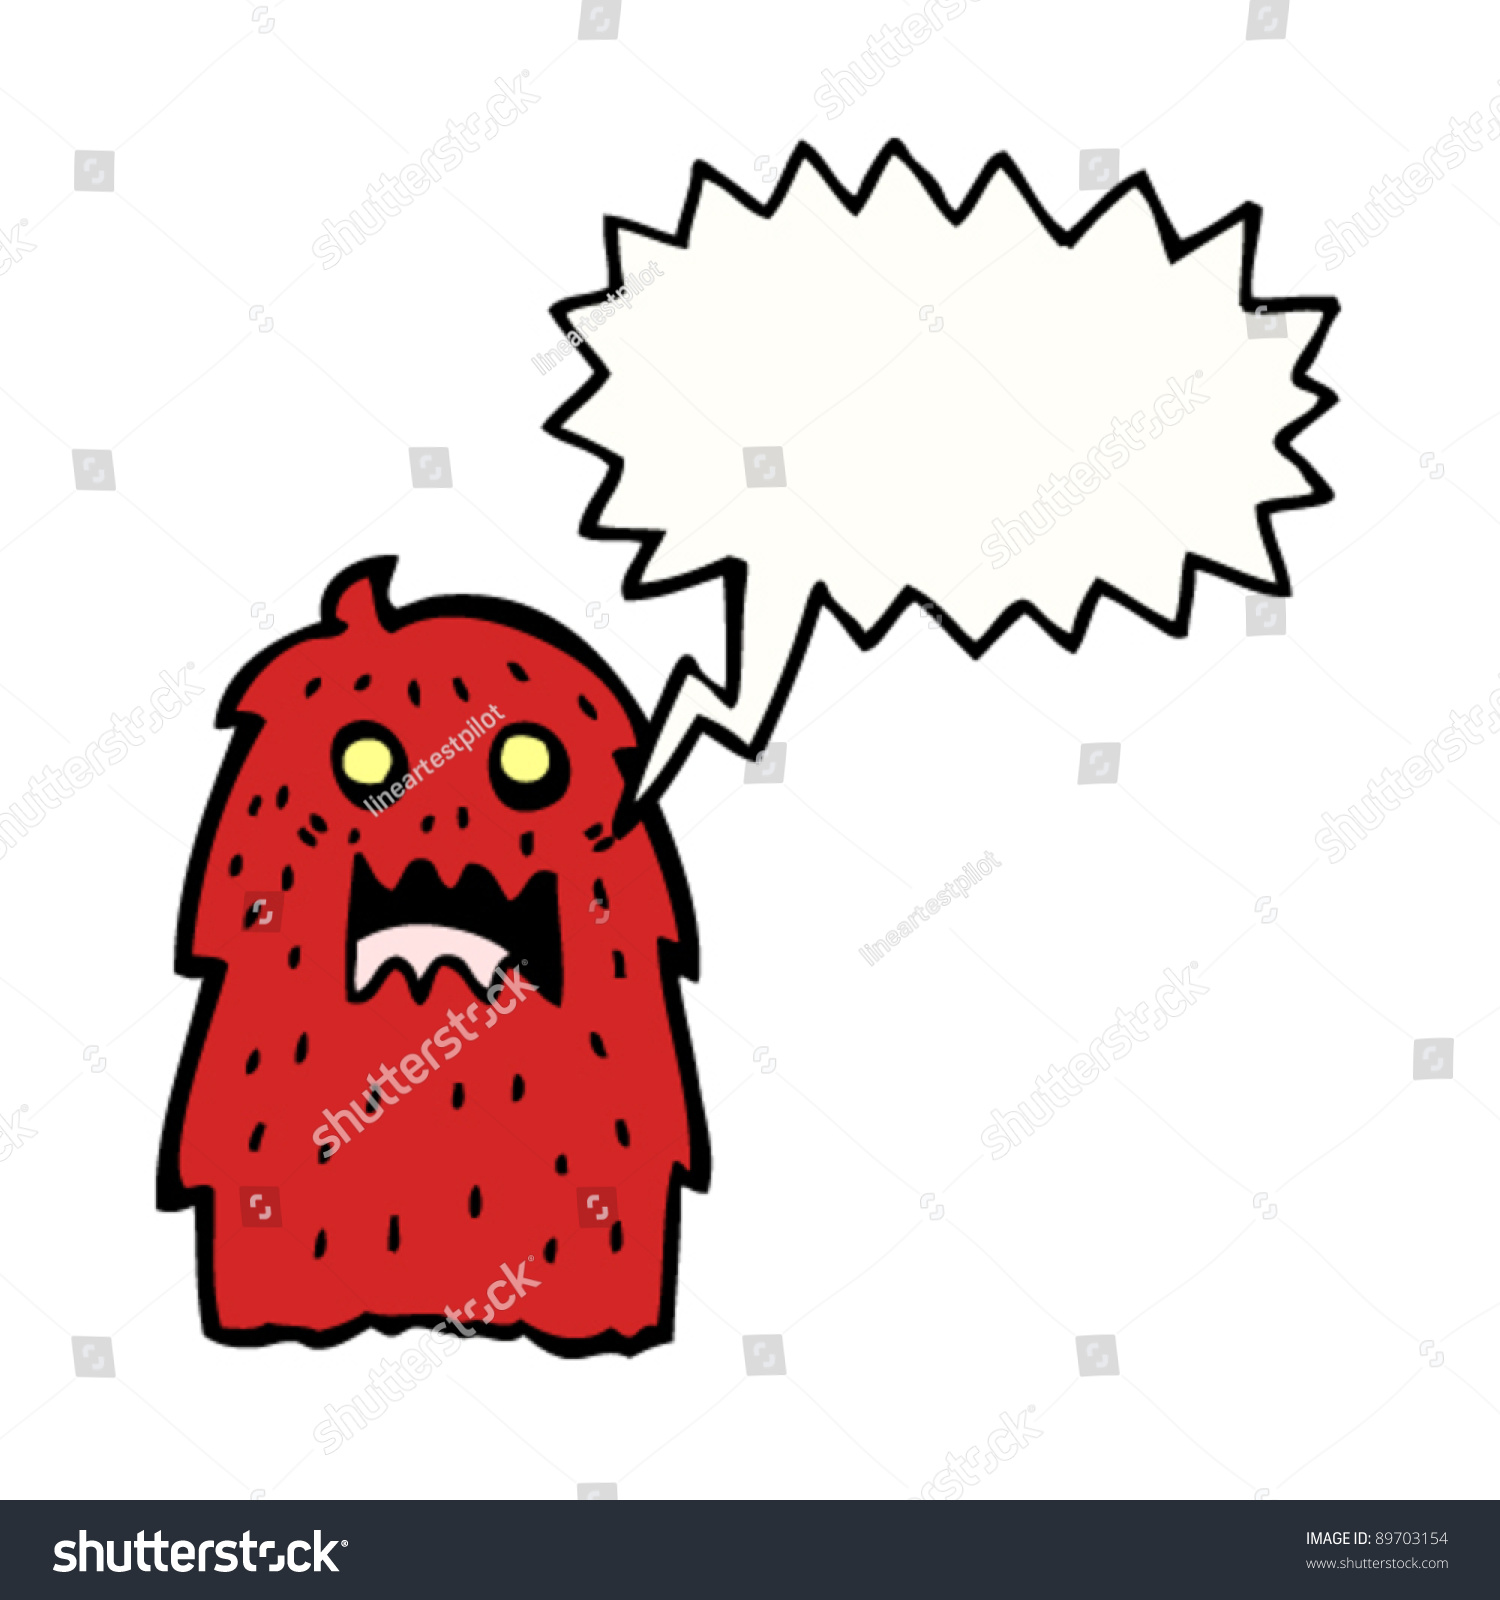 Scary Hairy Monster Cartoon Stock Vector Royalty Free 89703154 Shutterstock